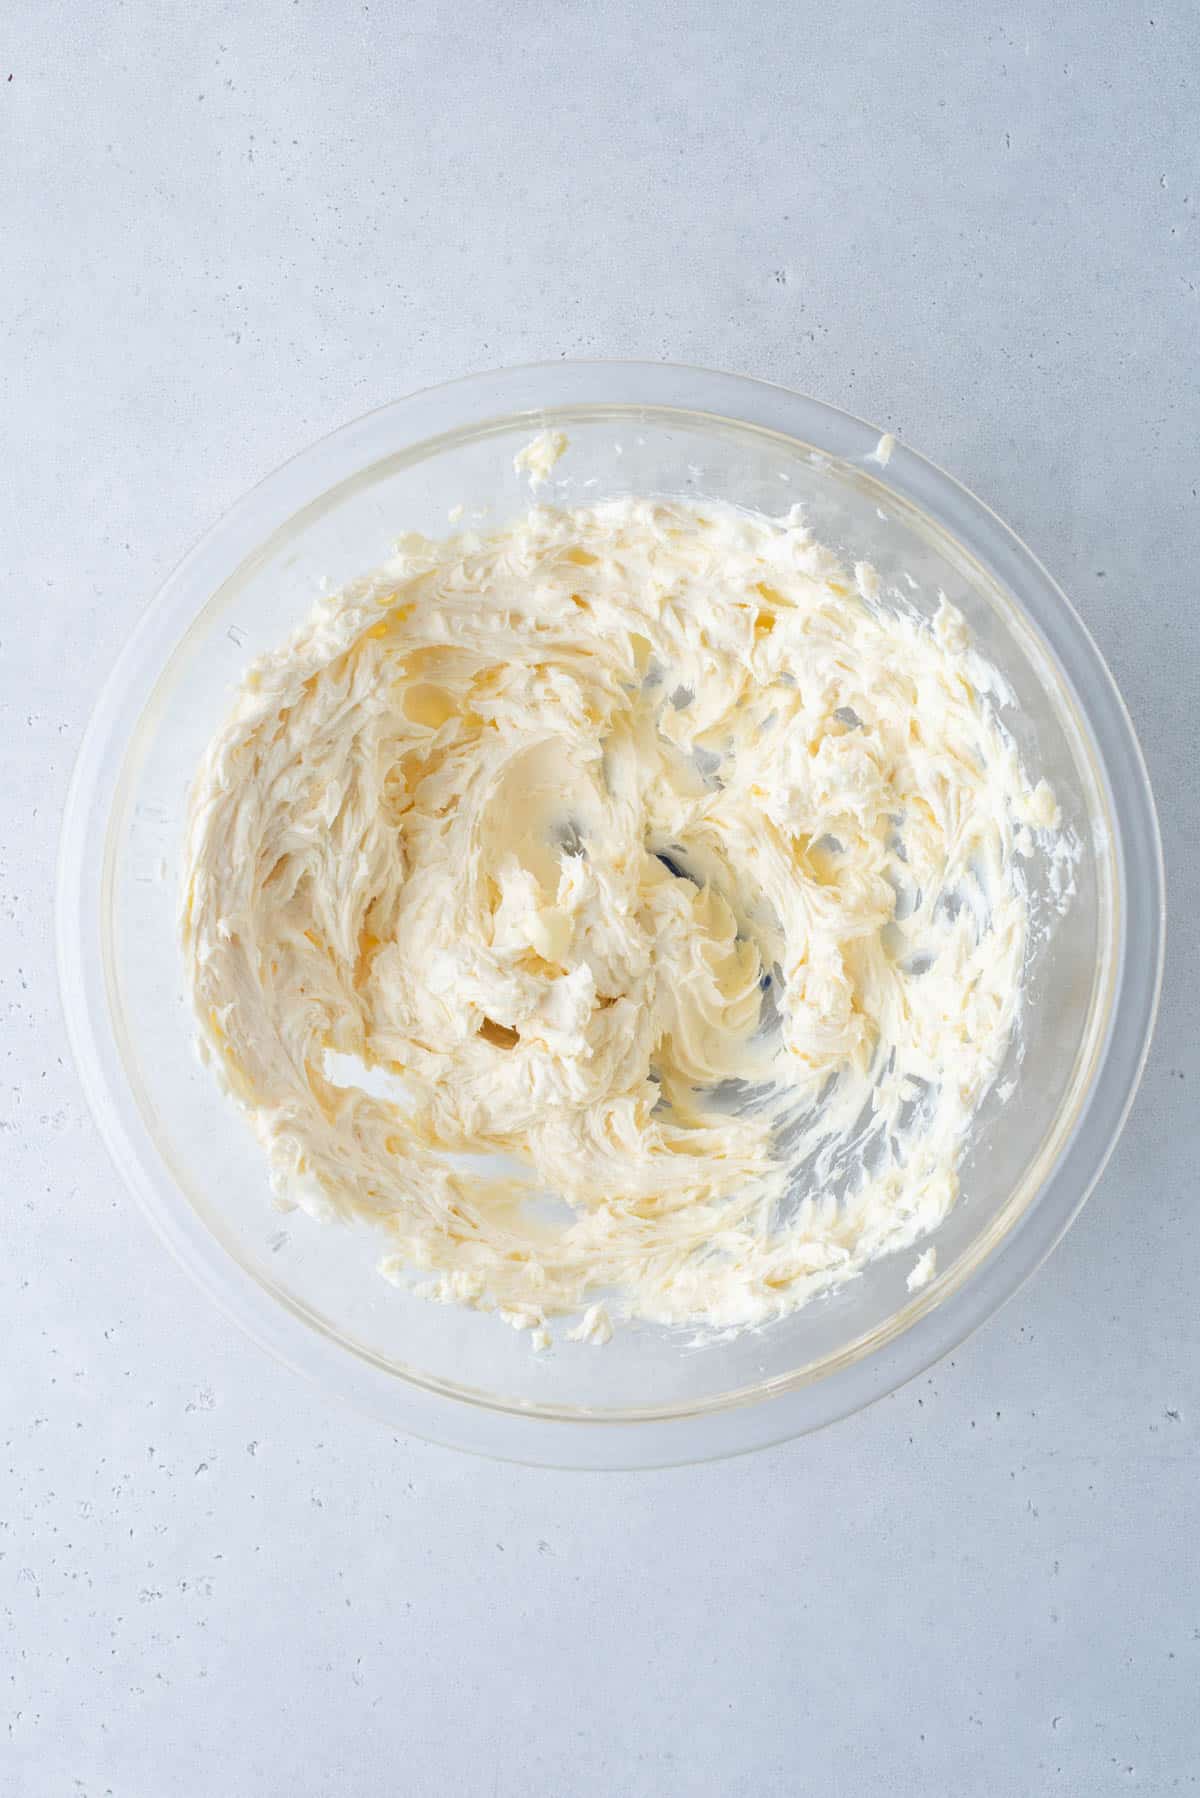 cream cheese and butter mixed together in a clear glass bowl on a white surface